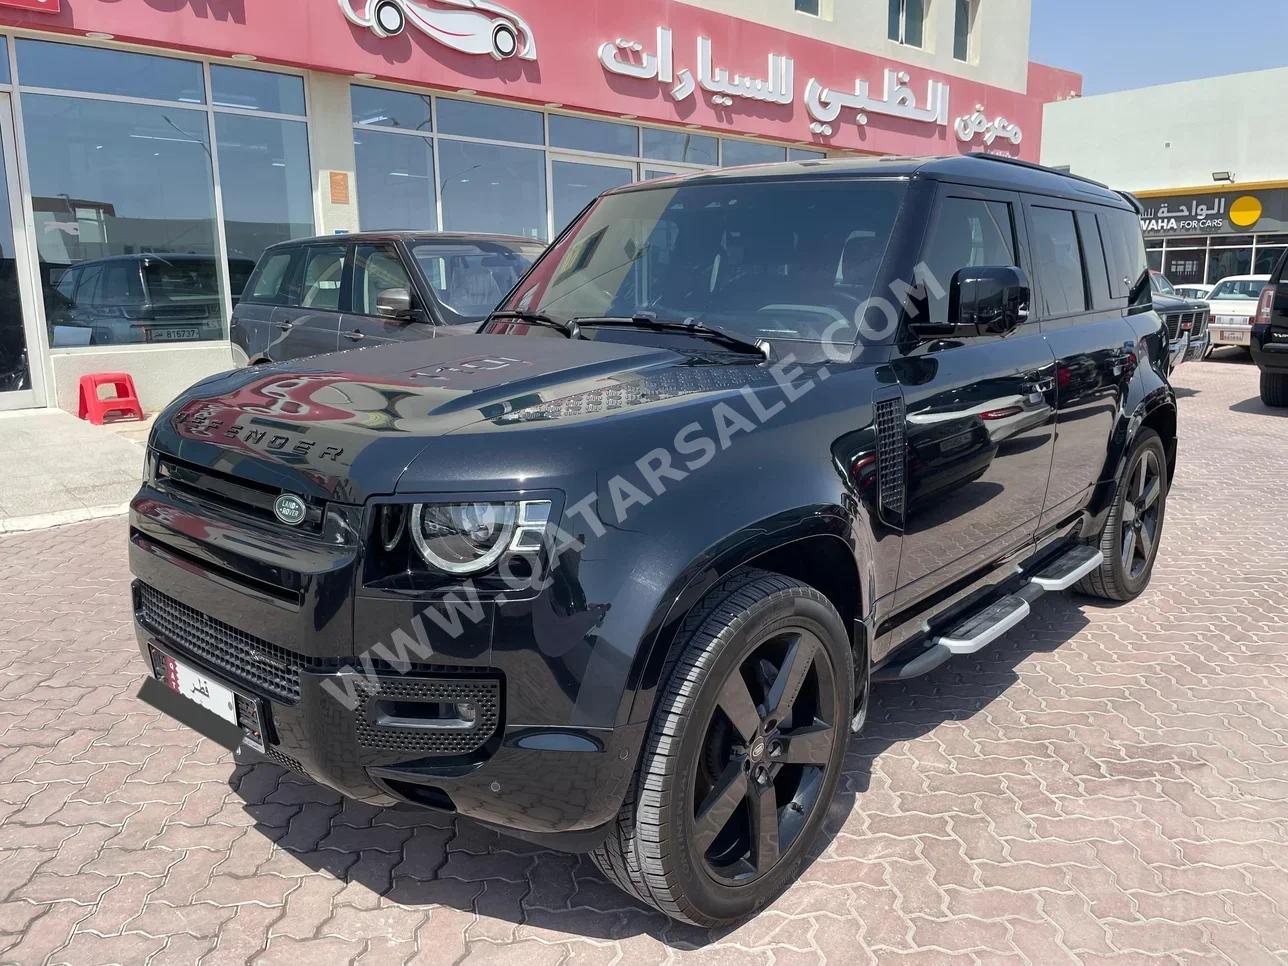 Land Rover  Defender  X Dynamic  2023  Automatic  32,000 Km  6 Cylinder  Four Wheel Drive (4WD)  SUV  Black  With Warranty